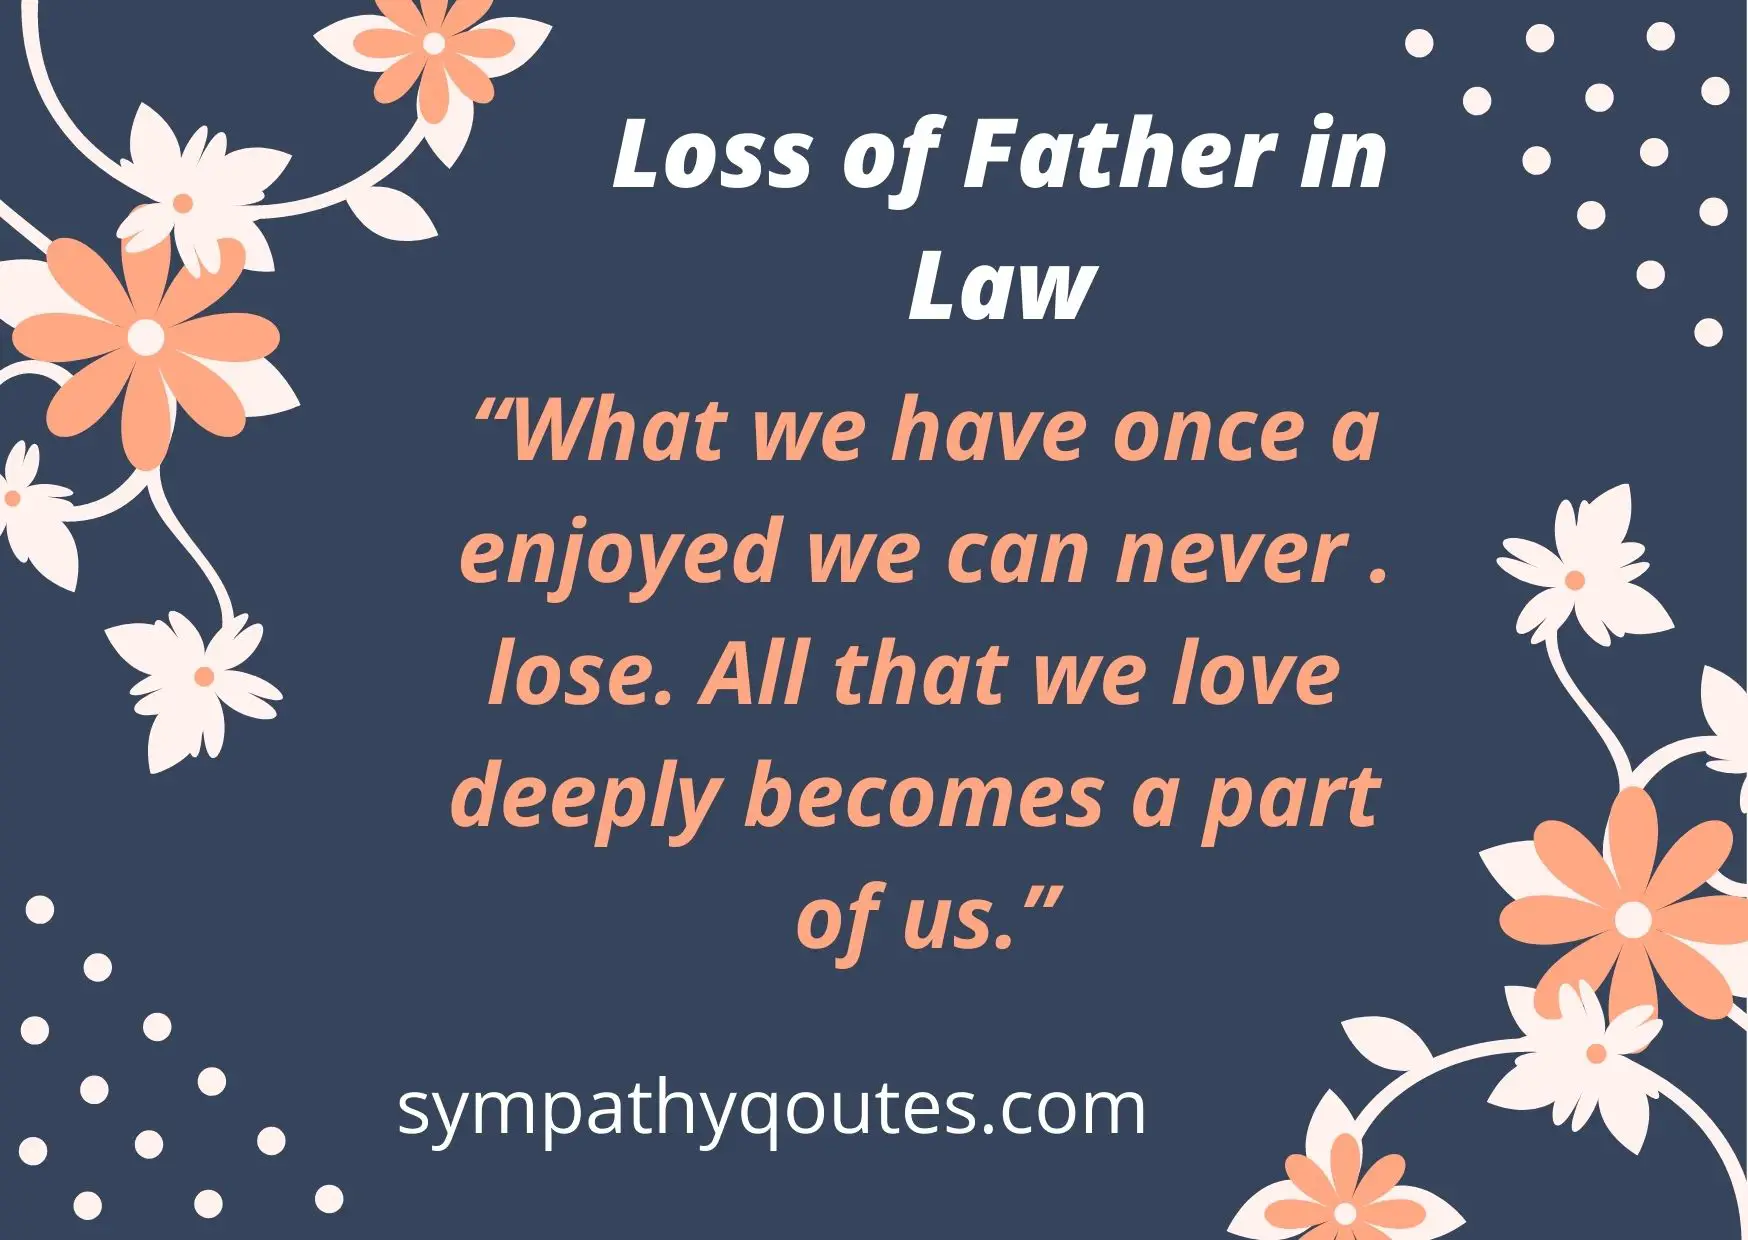 Sympathy Quotes for Loss of Father in Law